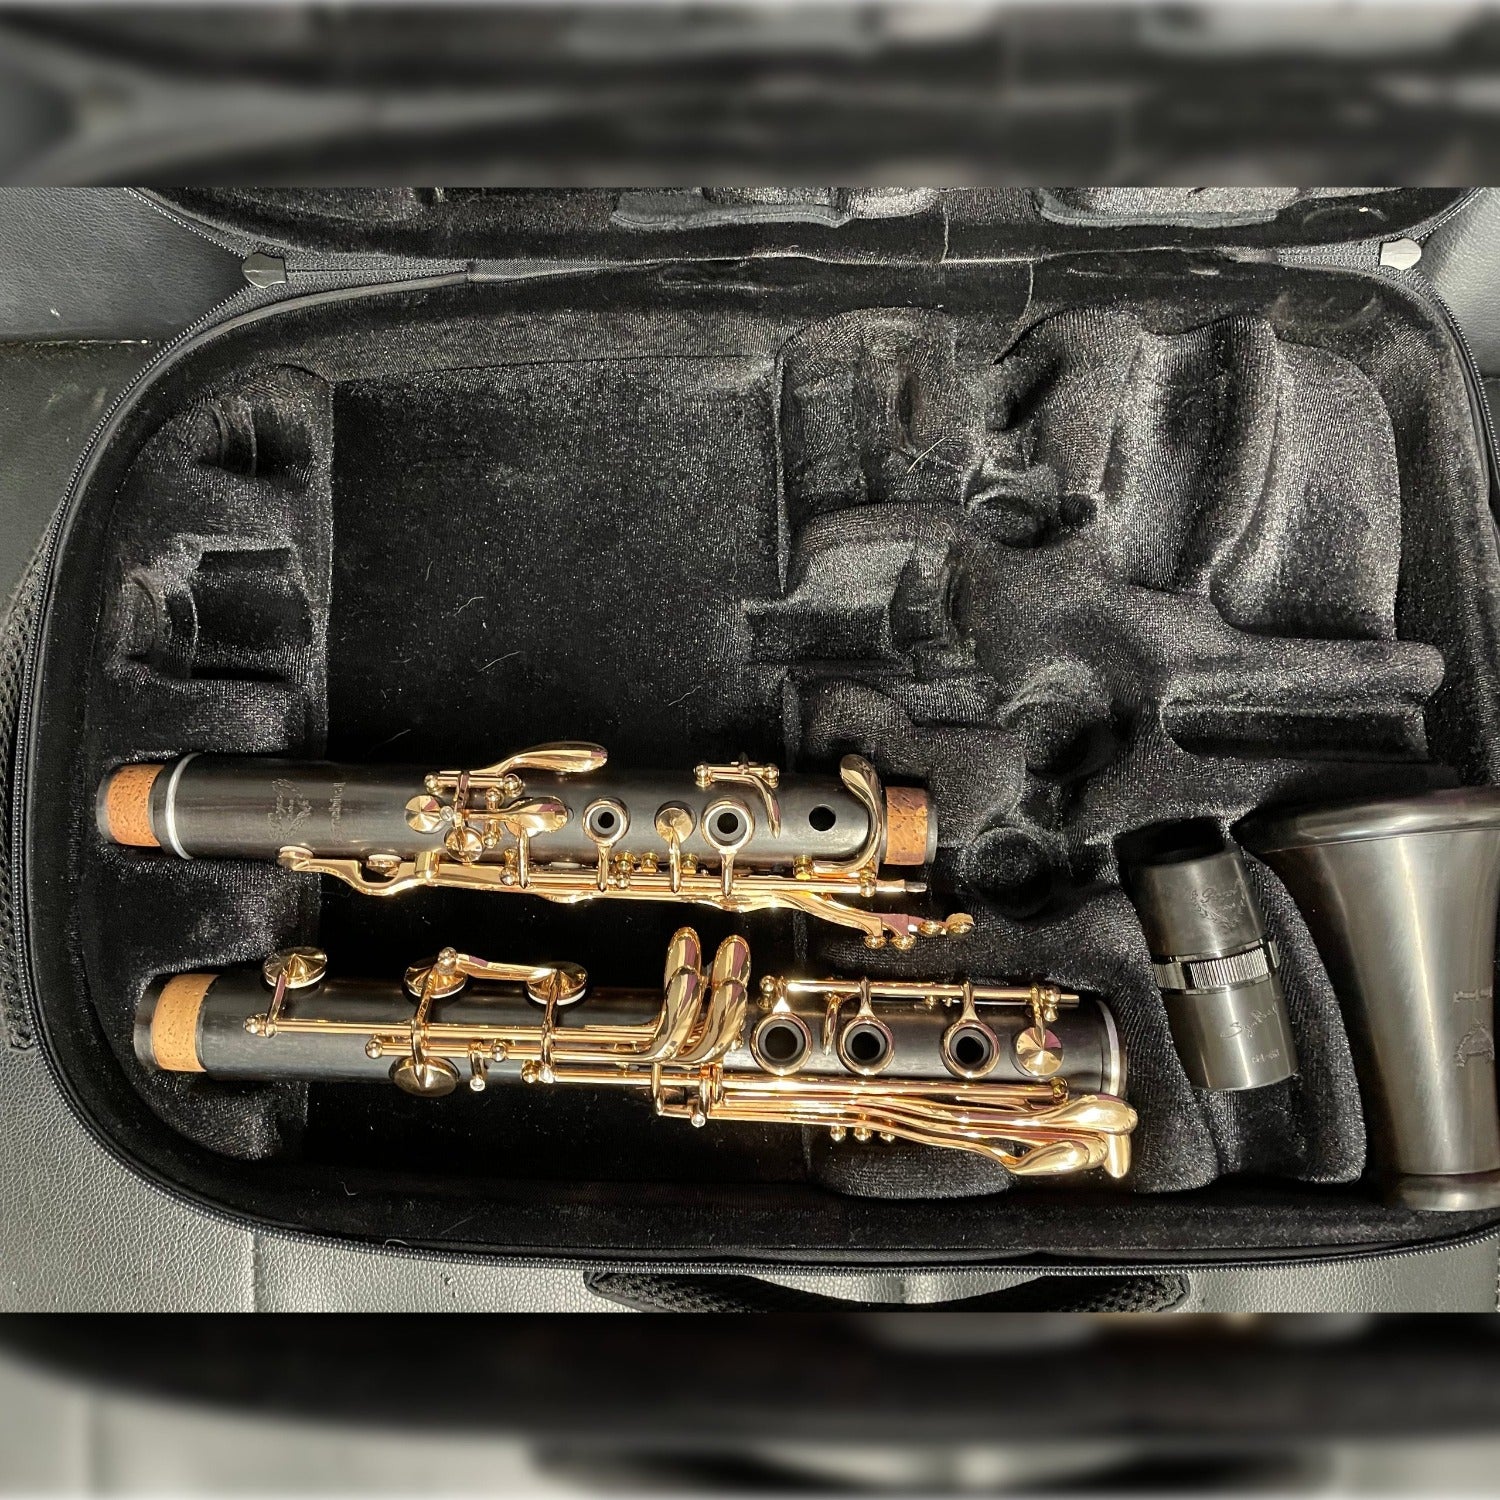 Royal Global rose gold edition Firebird A clarinet disassembled in case